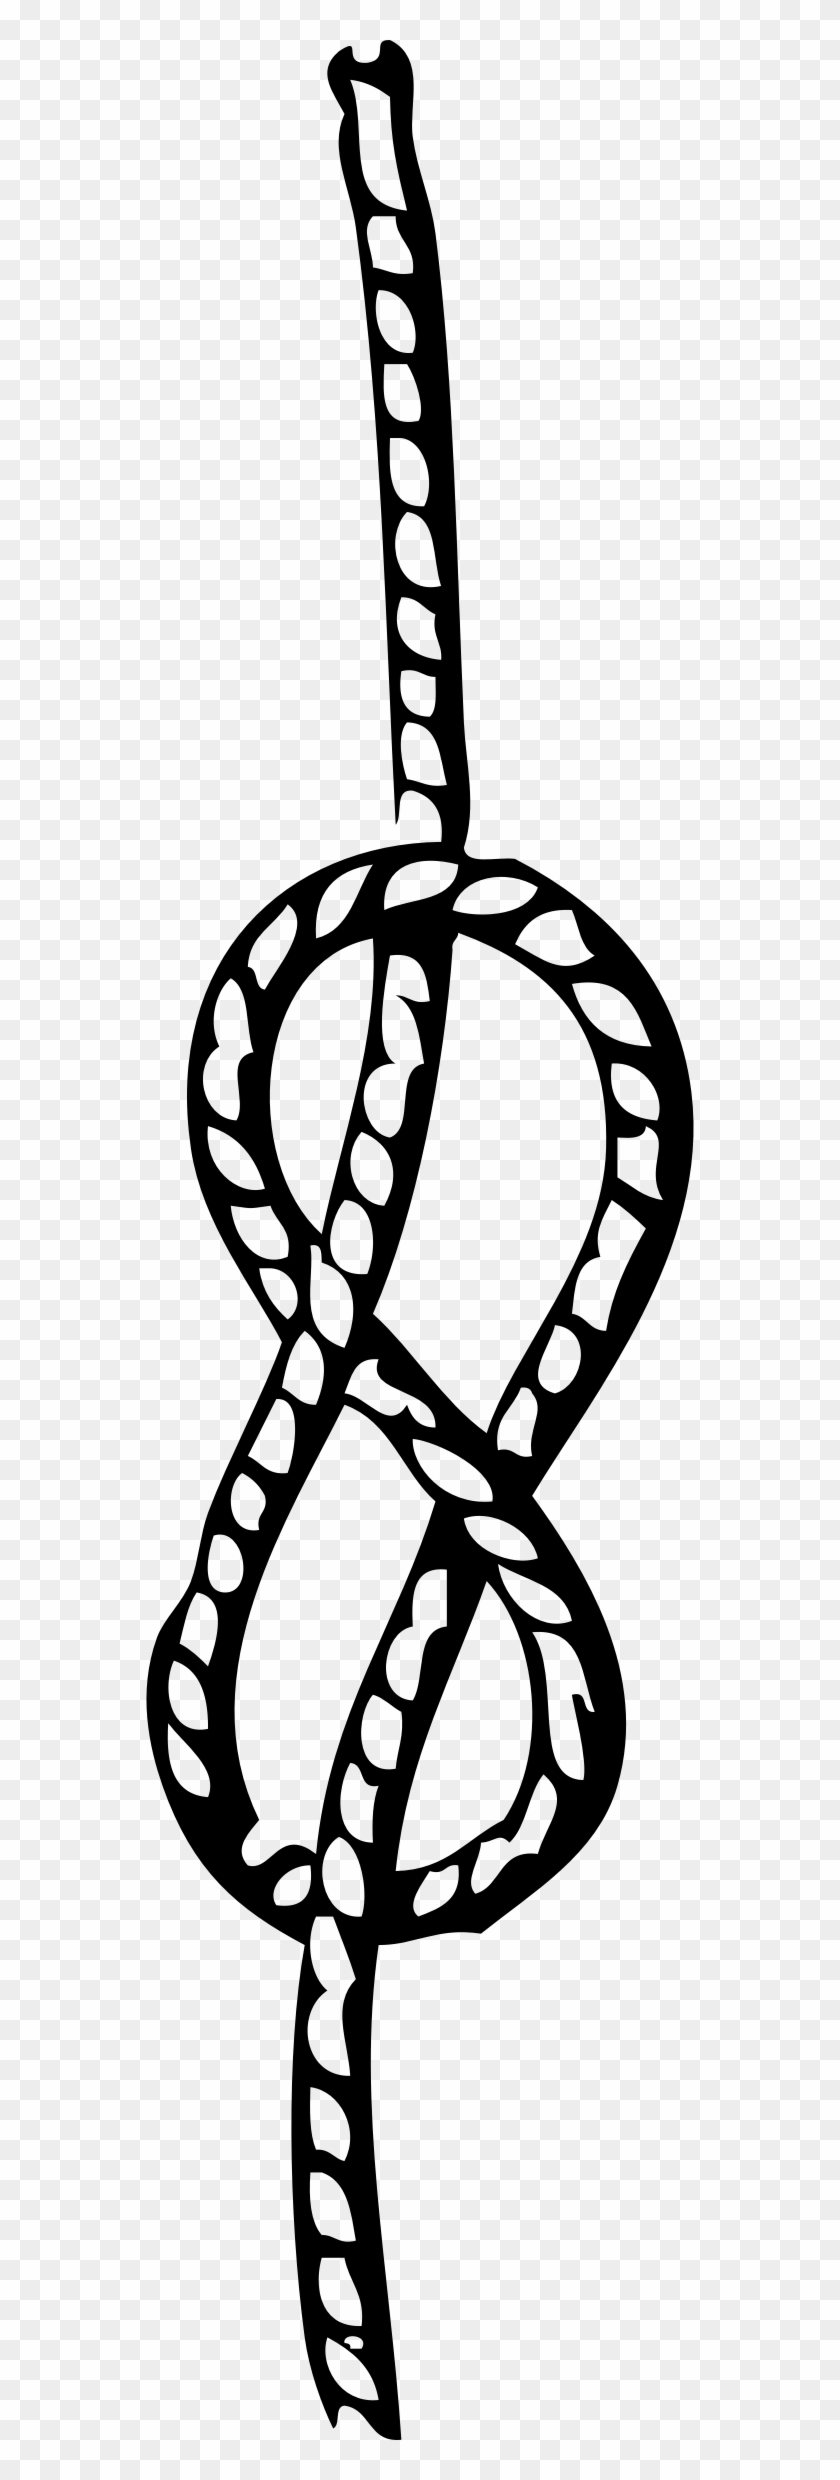 Knot - Clip Art Knotted Rope - Png Download #1444841